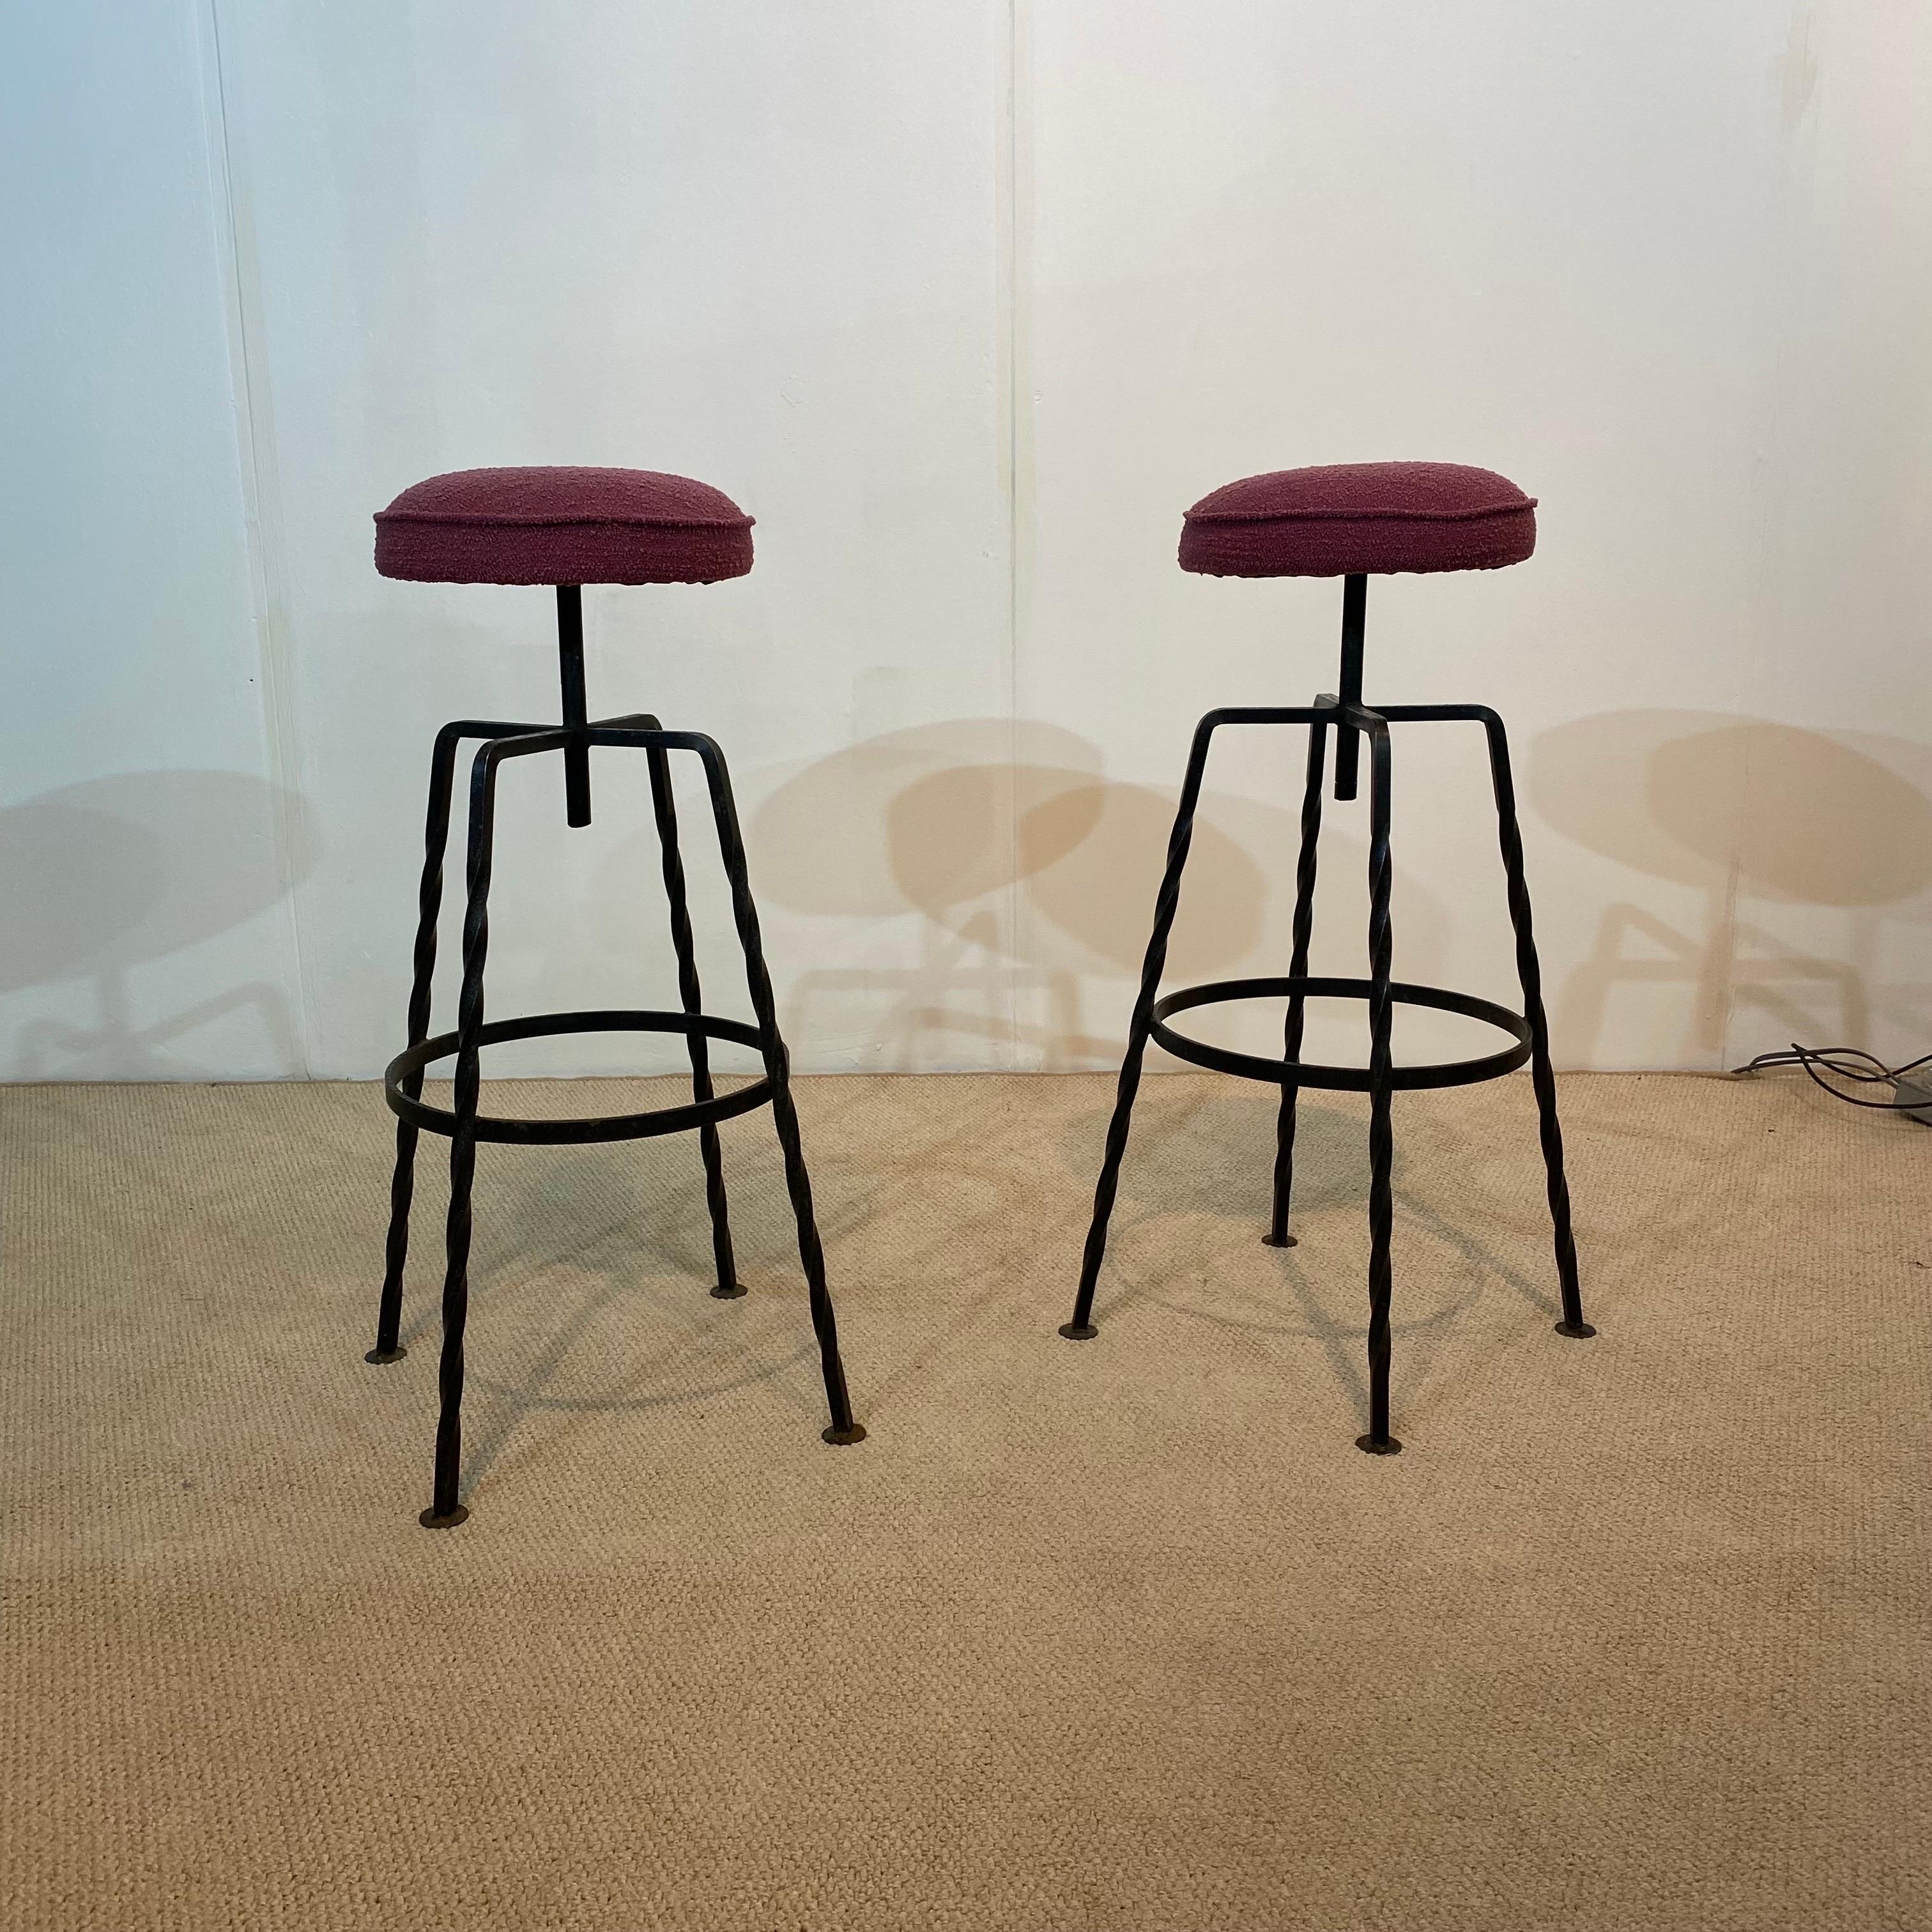 Pair Maroon Boucle Iron Swivel Bar Stools Midcentury Italian Vintage 1950s 60s In Good Condition For Sale In London, GB